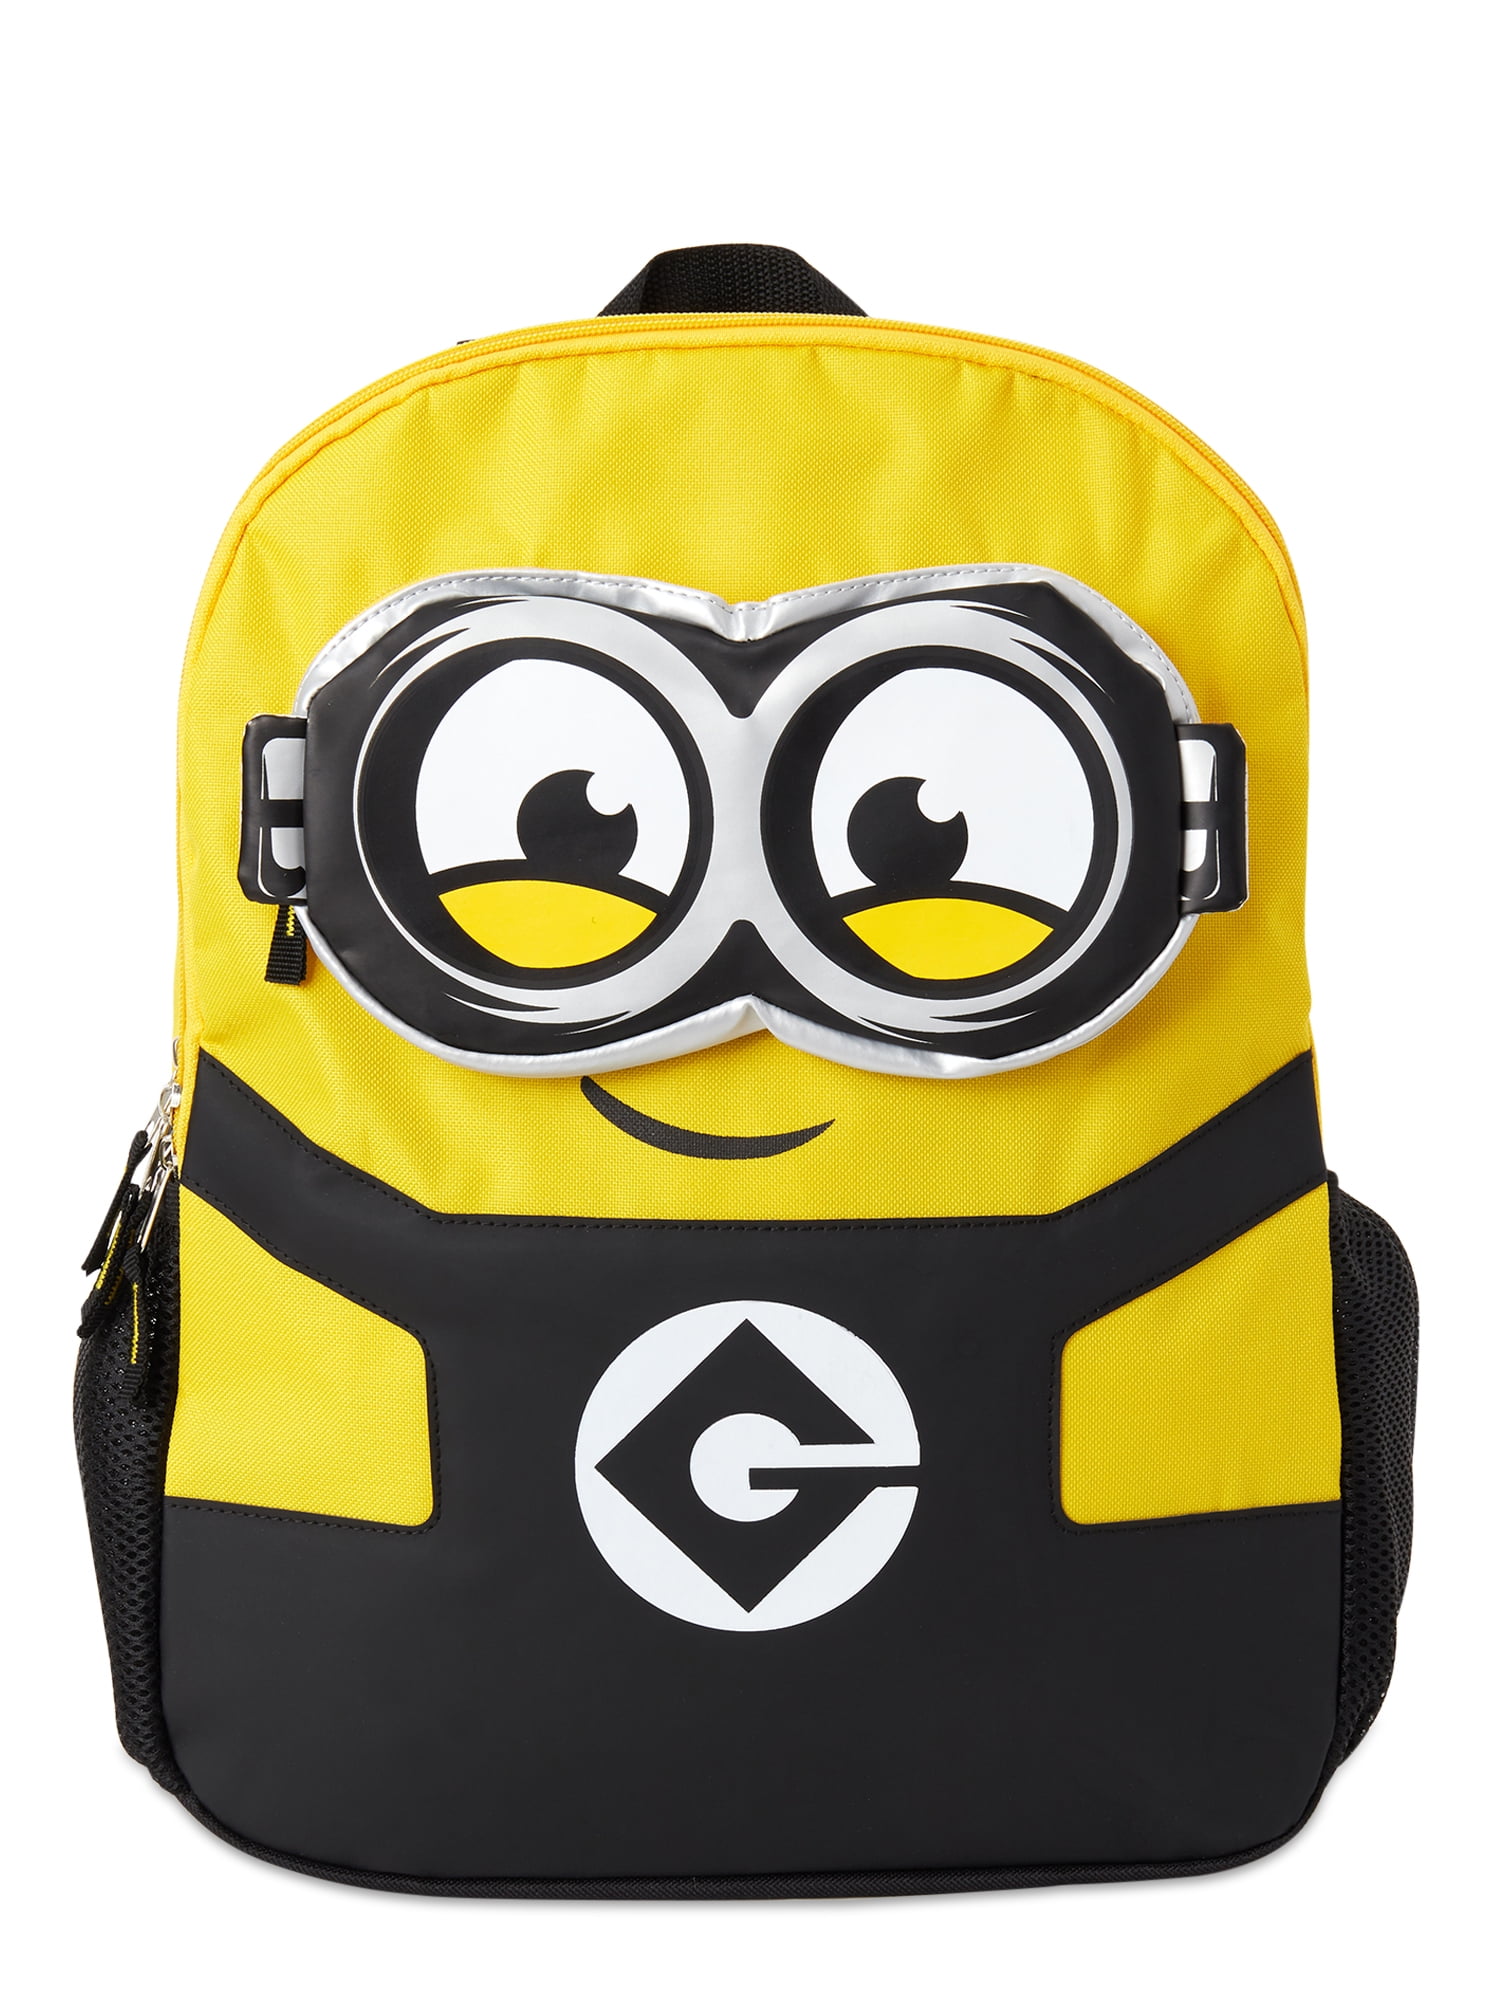 Children's Backpacks Just $9.99 (Minion, Star Wars and More!) - My